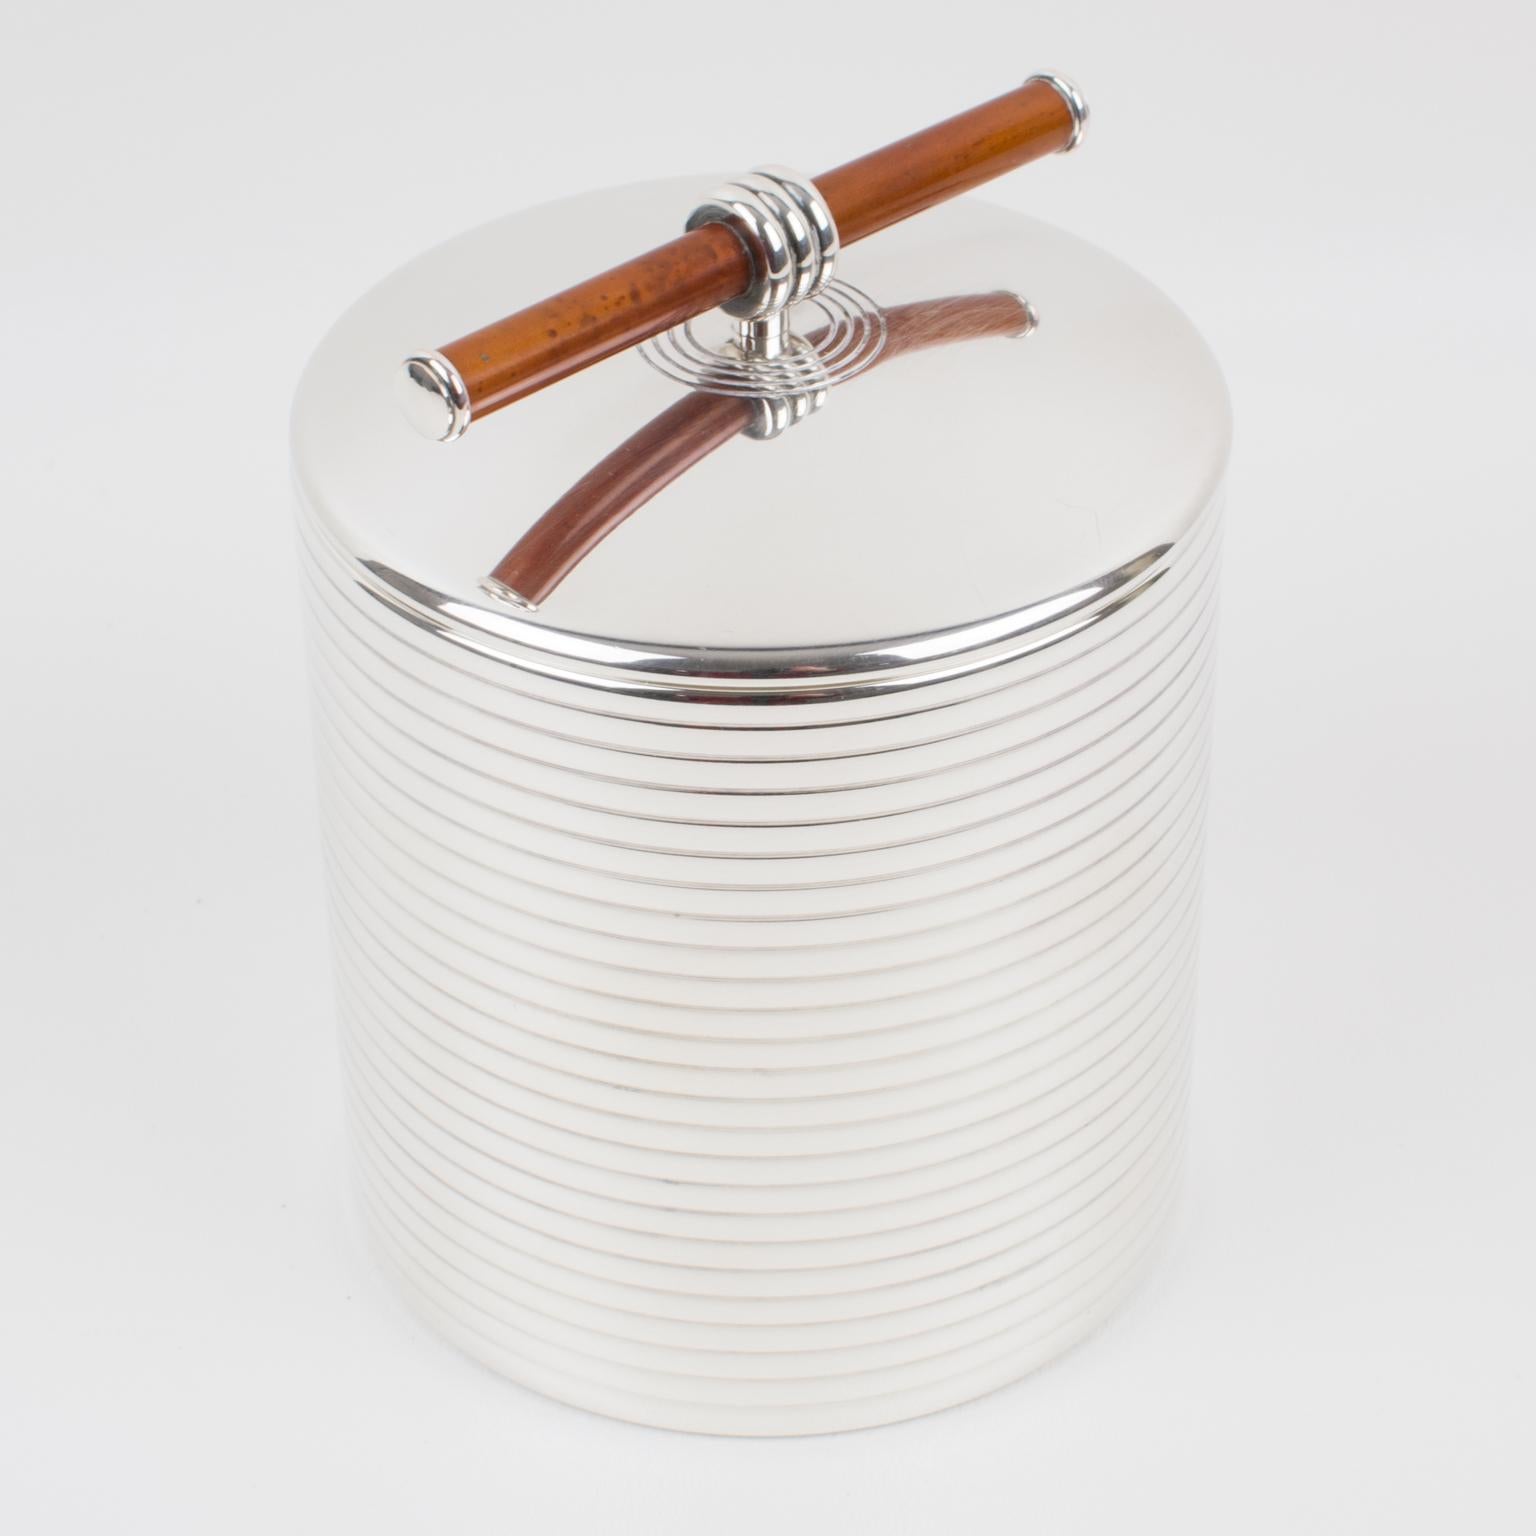 A lovely tall silver plate lidded box by Christofle, France, for the 